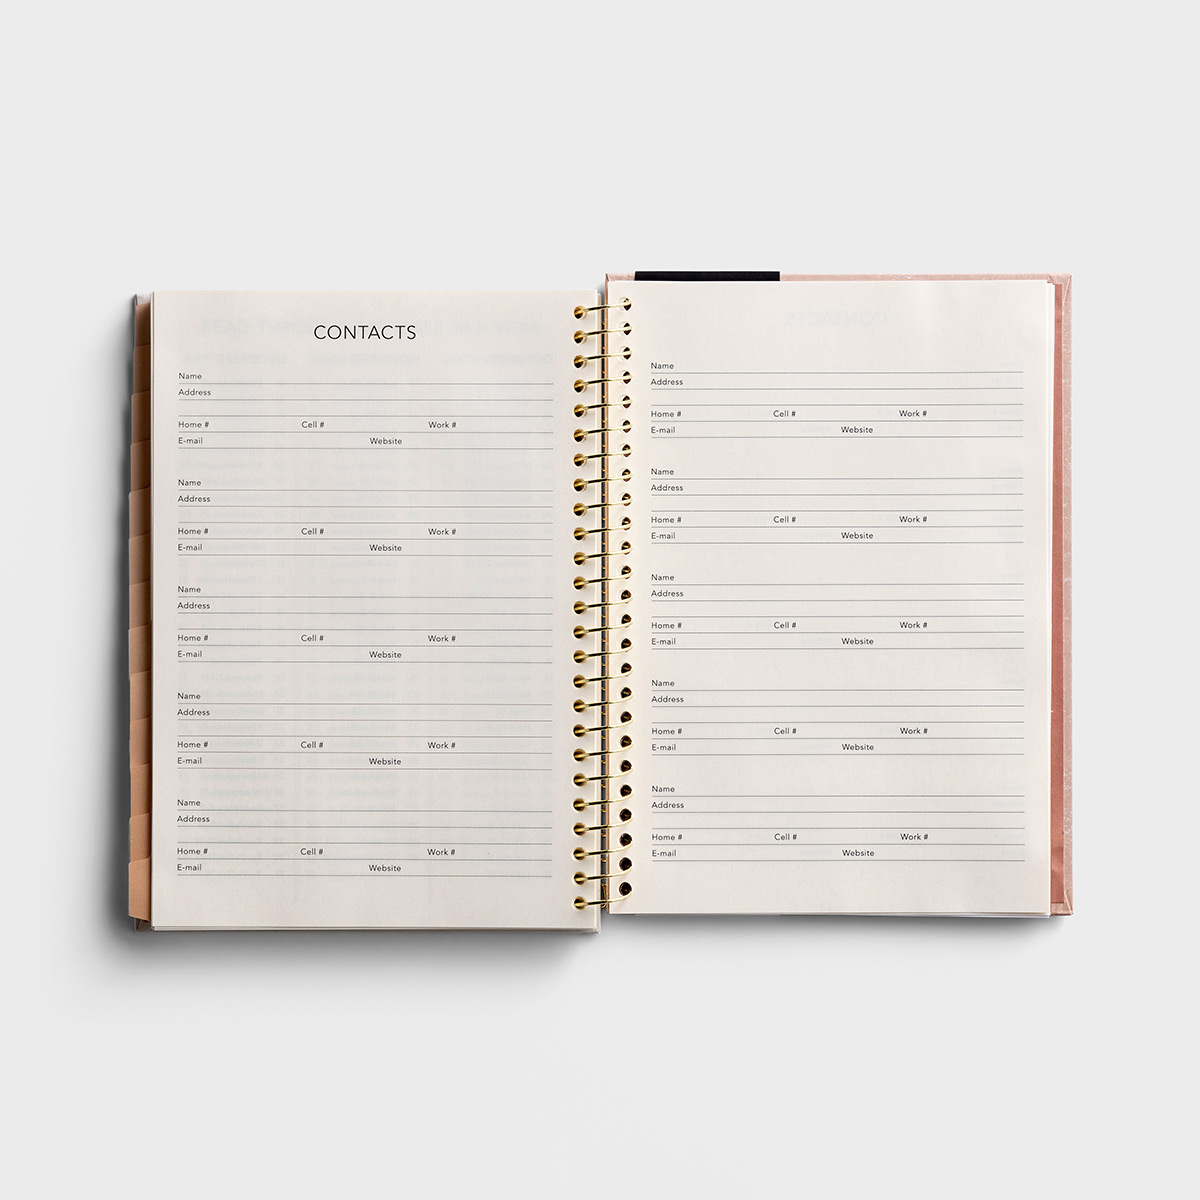 Katygirl - The Lord God Is Our Sun + Our Shield - Undated 12mo Monthly/Weekly Planner